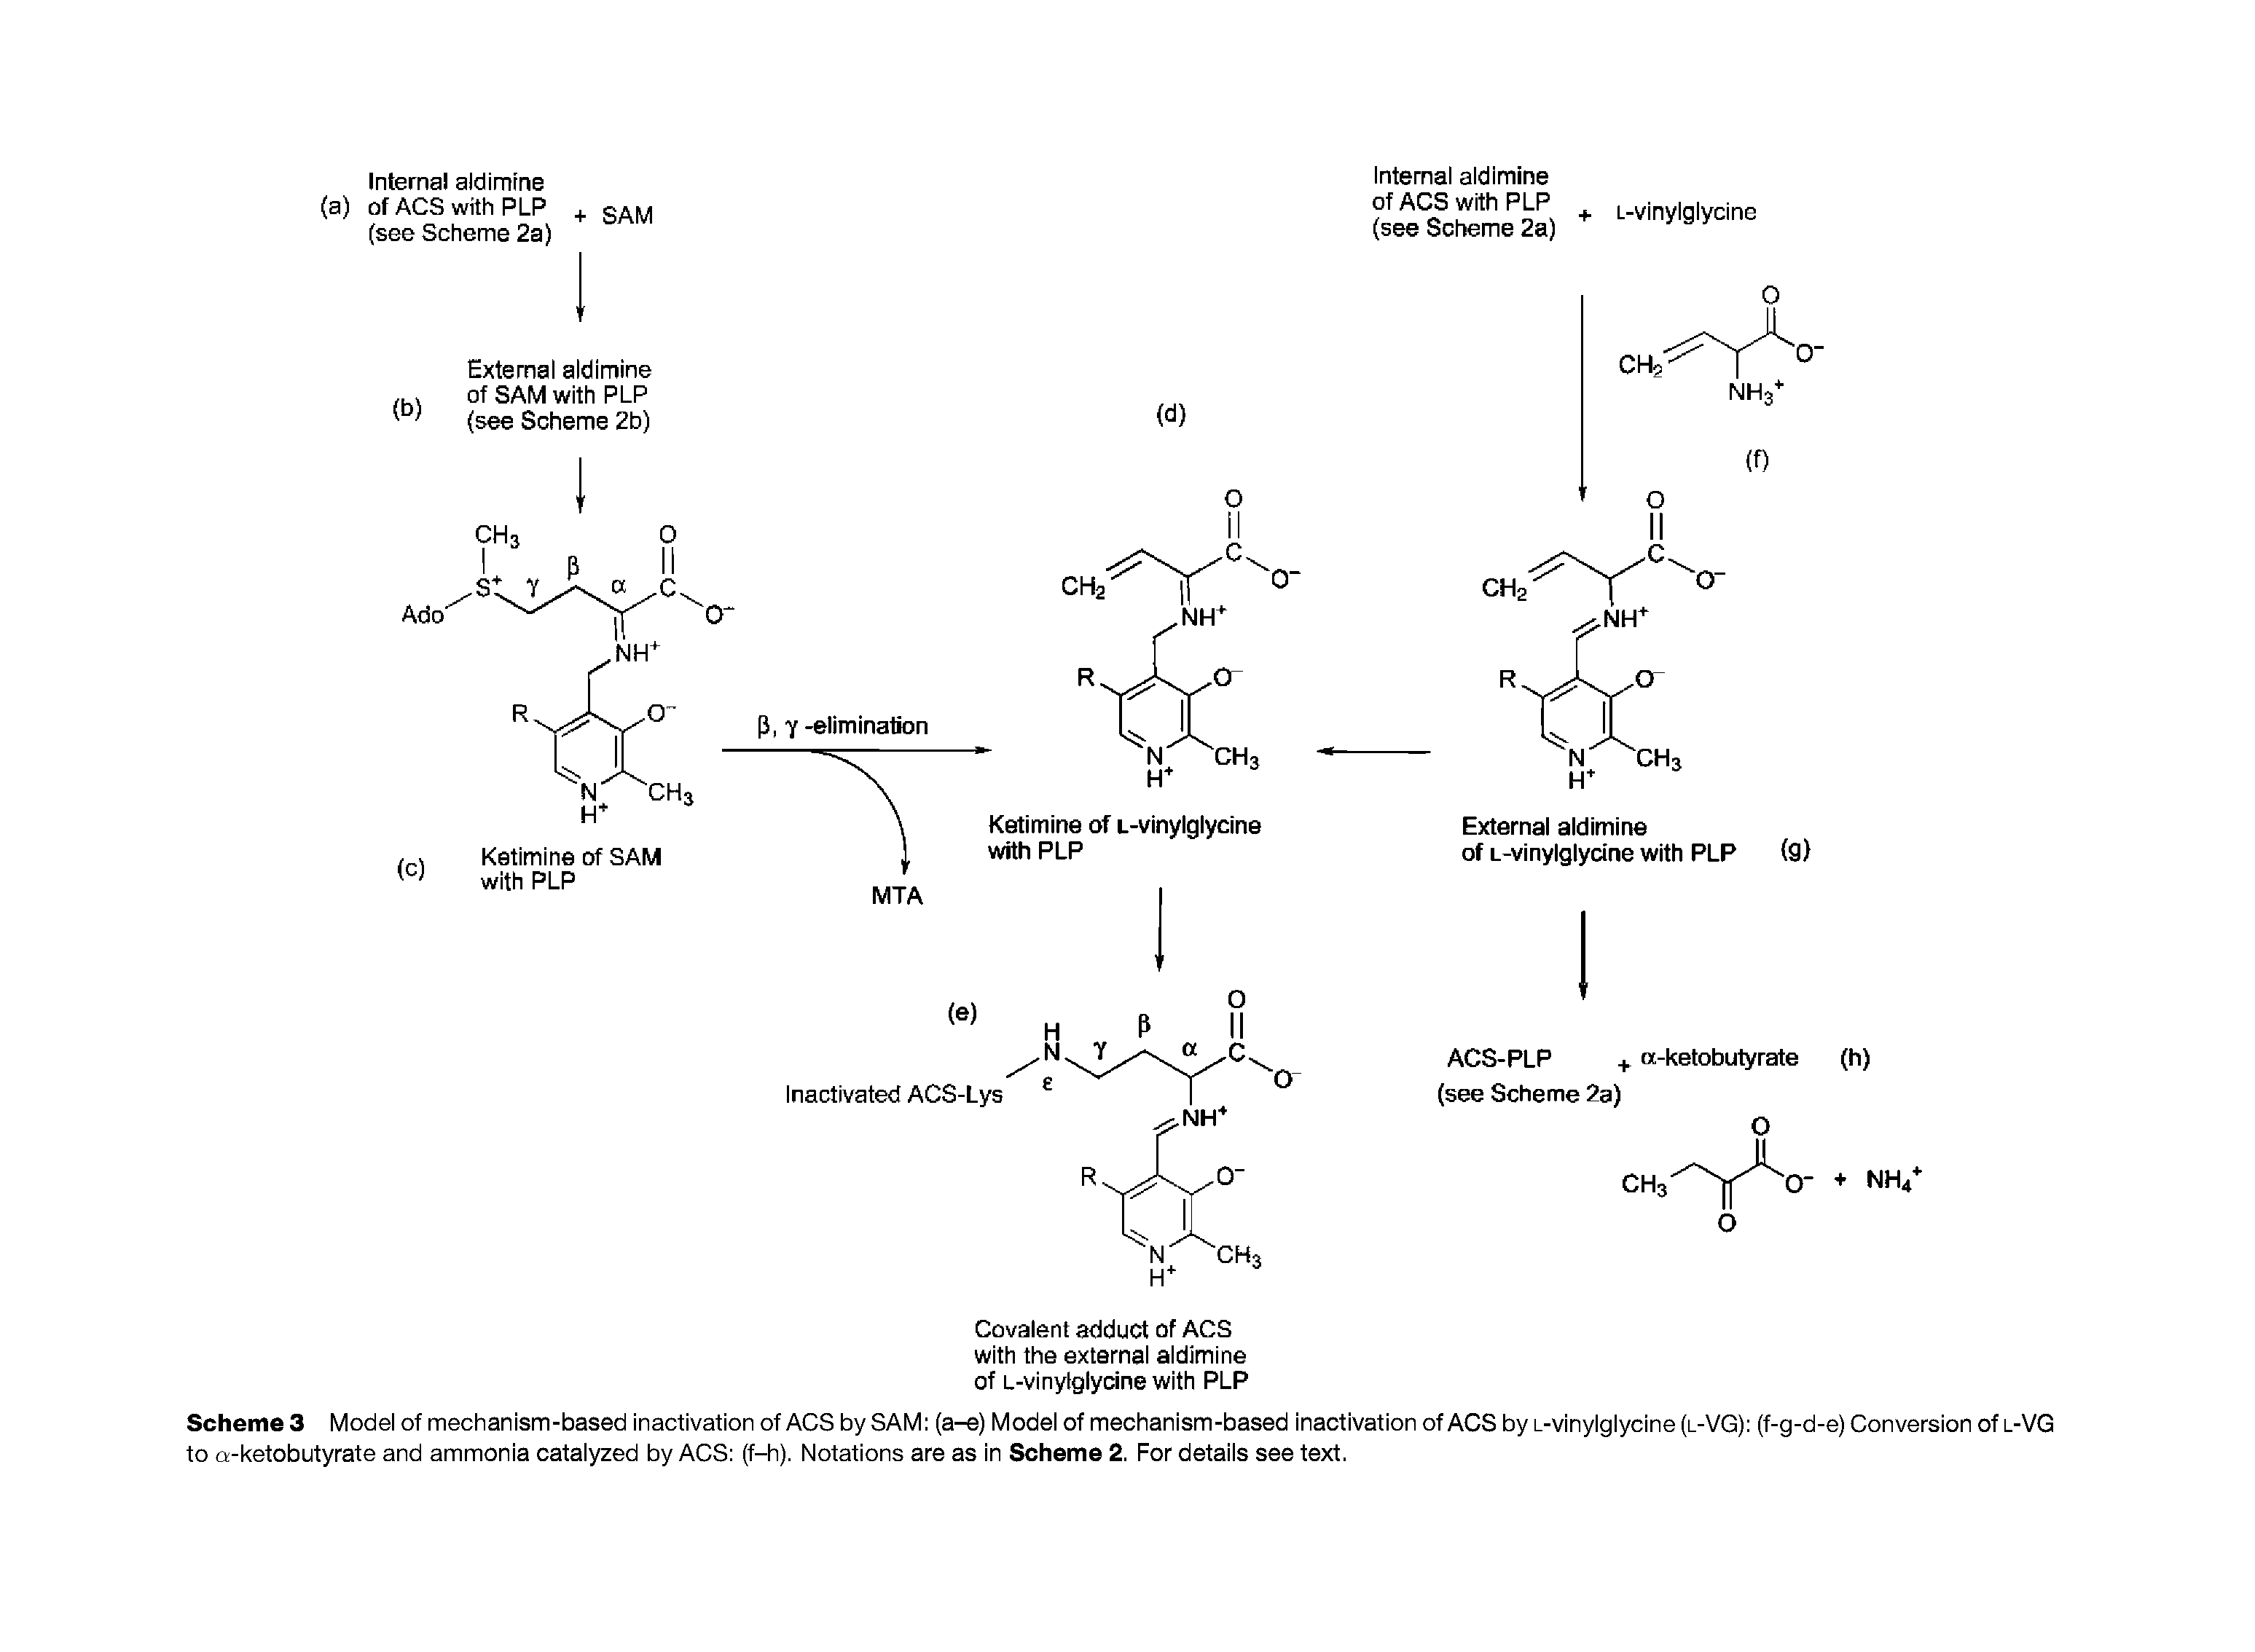 Schemes Model of mechanism-based inactivation of ACS by SAM (a-e) Model of mechanism-based inactivation of ACS by L-vinylglycine (l-VG) (f-g-d-e) Conversion of l-VG to a-ketobutyrate and ammonia catalyzed by ACS (f-h). Notations are as in Scheme 2. For details see text.